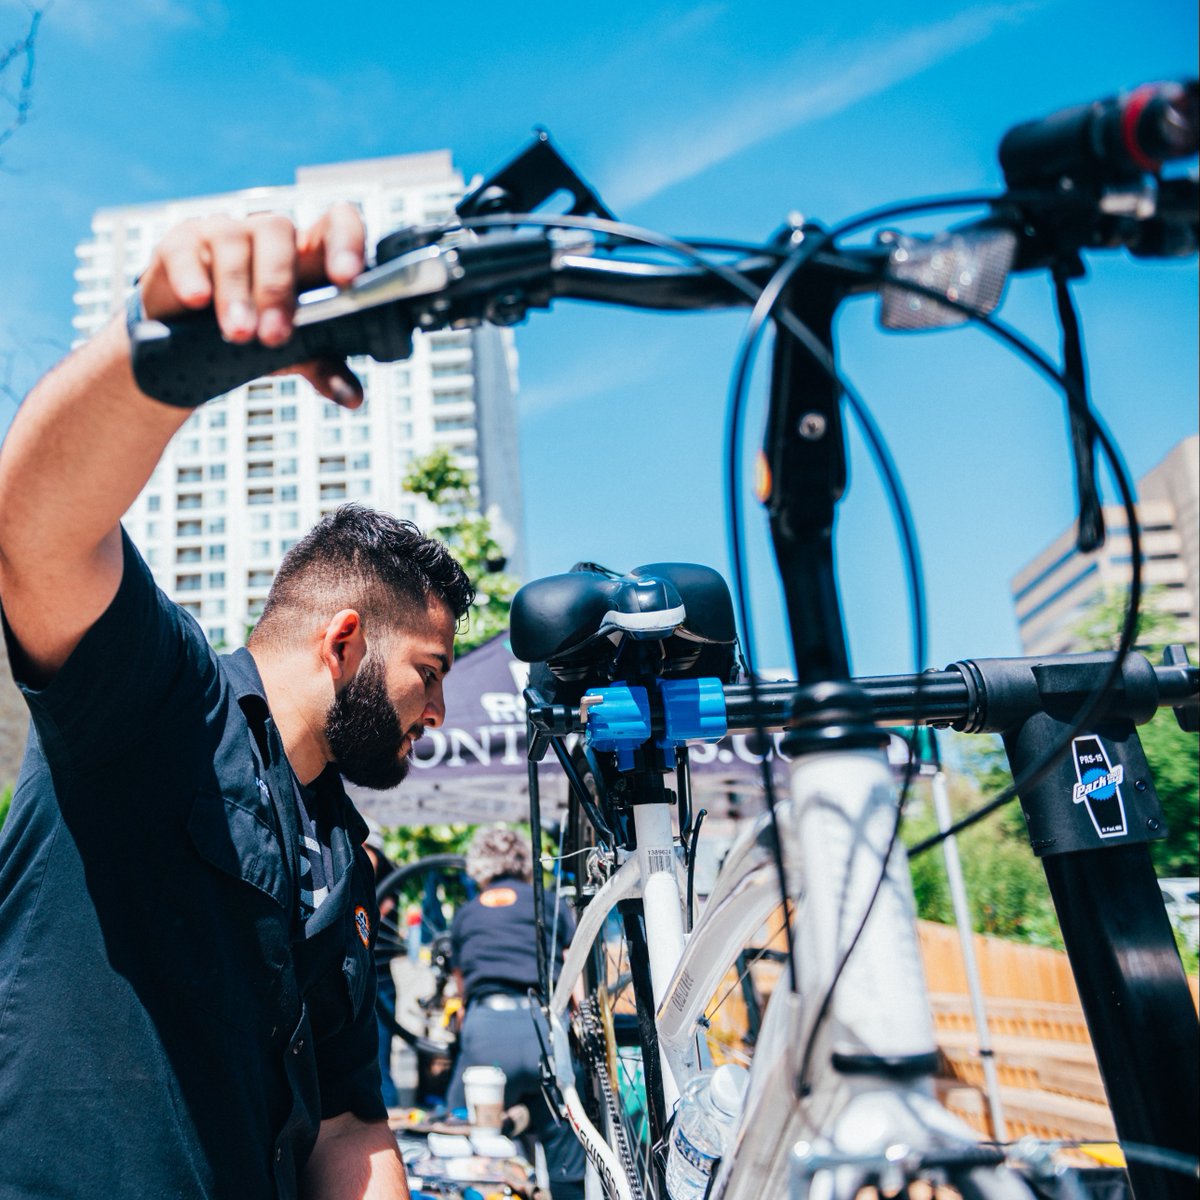 🚴‍♂️ Safety first! Join us at Conte's Bike Shop on Thursday, May 2, for a FREE bike safety check. 🛠️ Expert mechanics will tune up your tires, handlebars, derailleurs, and more. Spots are limited, so register early! 🌼🚲 🔗 Learn more: bit.ly/3WhLc3J